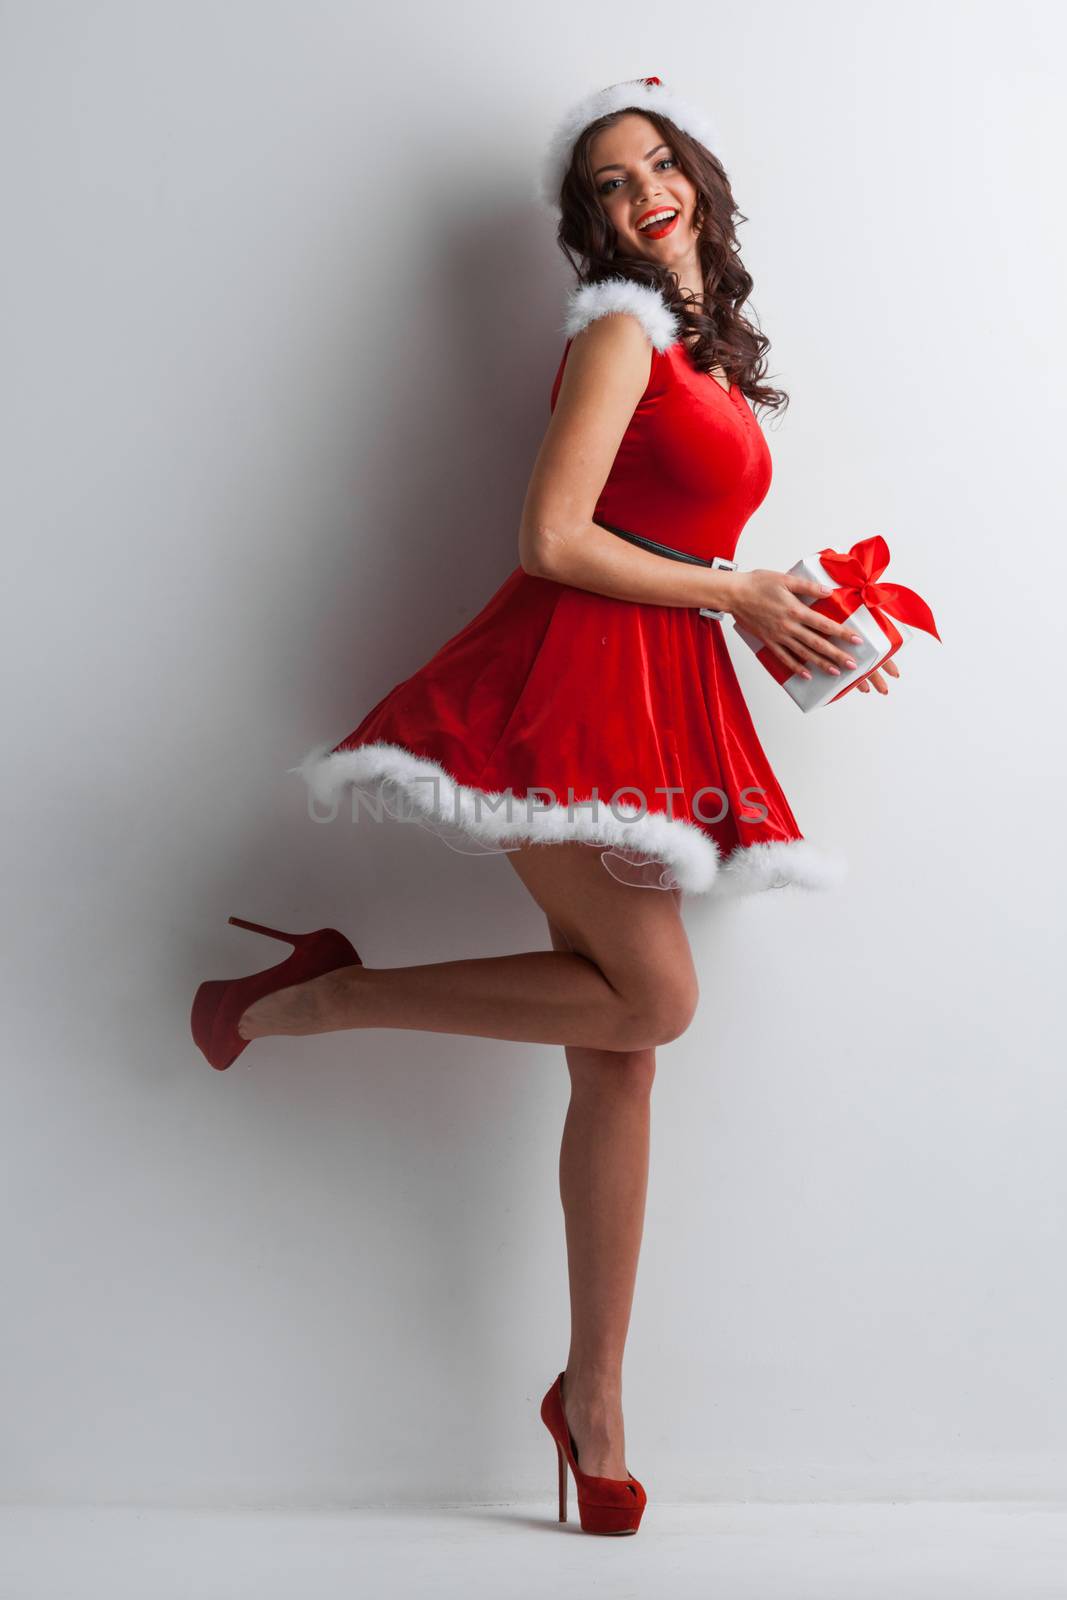 Beautiful young woman in Santa hat celebrating Christmas holding gift box